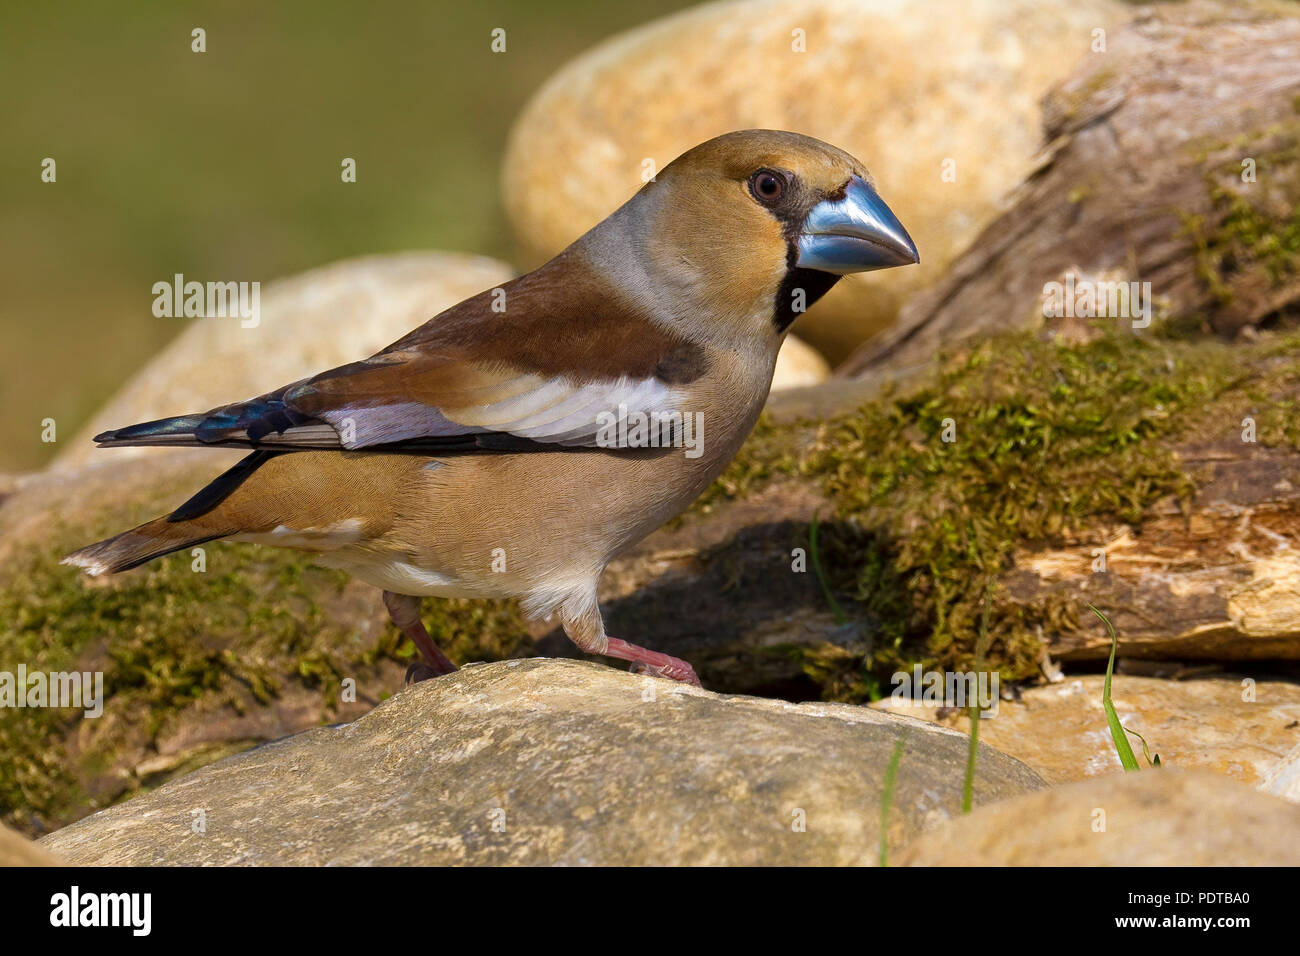 Hawfinch in front of moss-covered trunk. Stock Photo